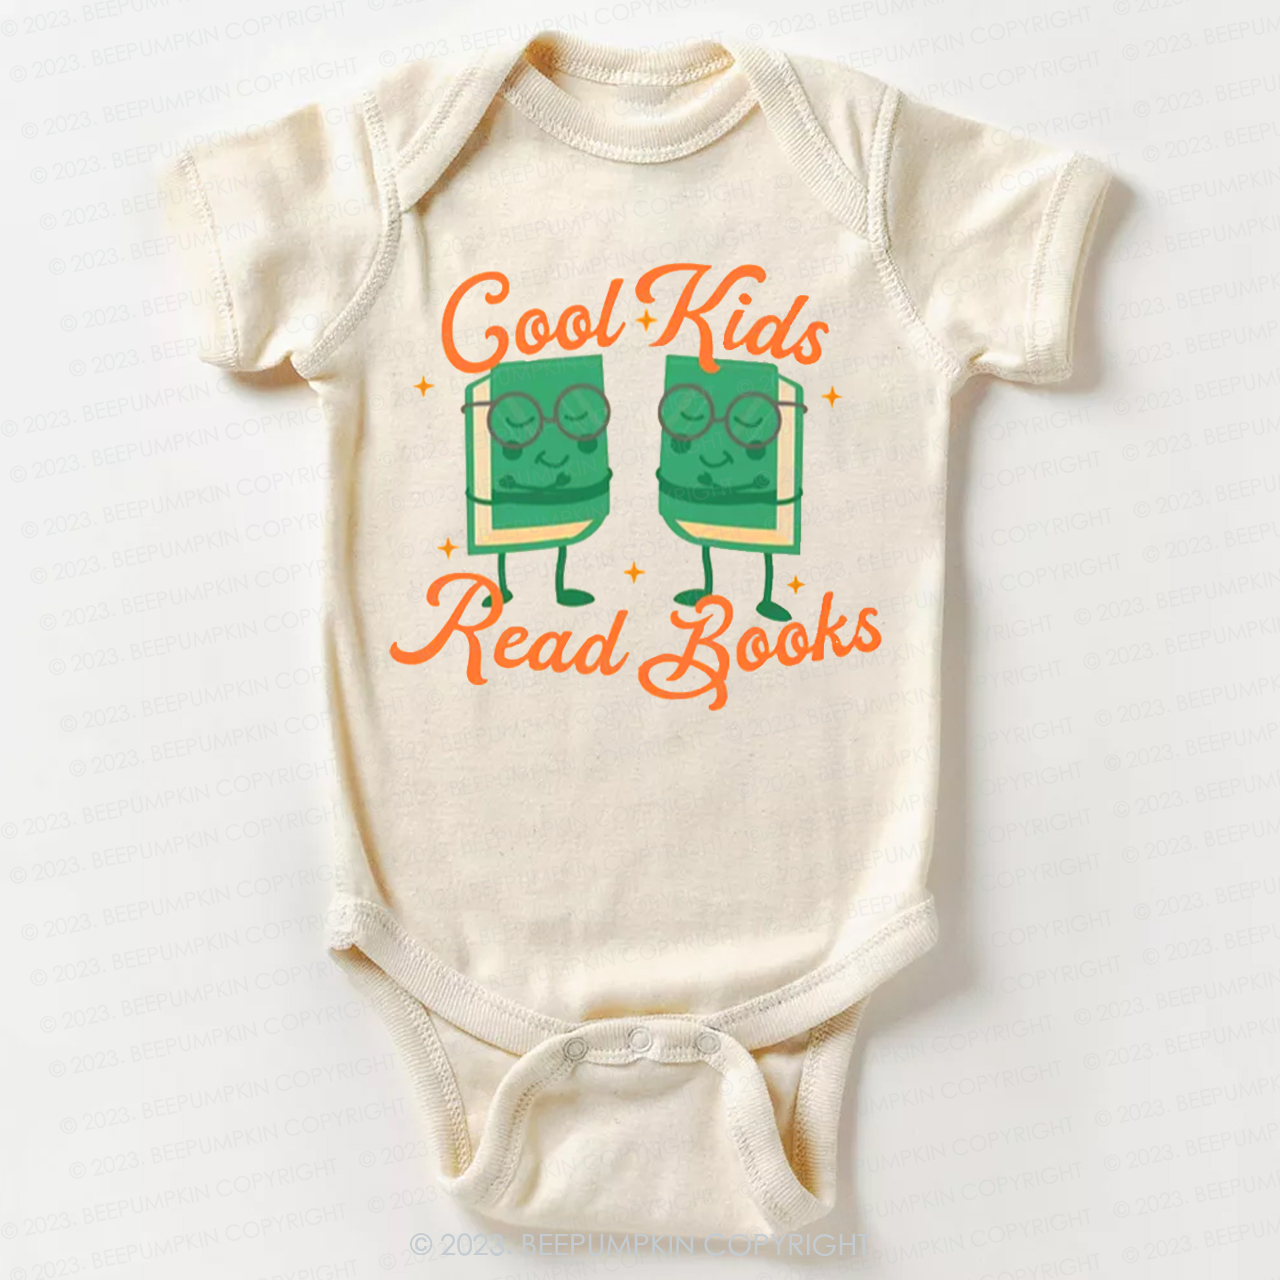 Cool Kids Read Books Funny Bodysuit For Baby